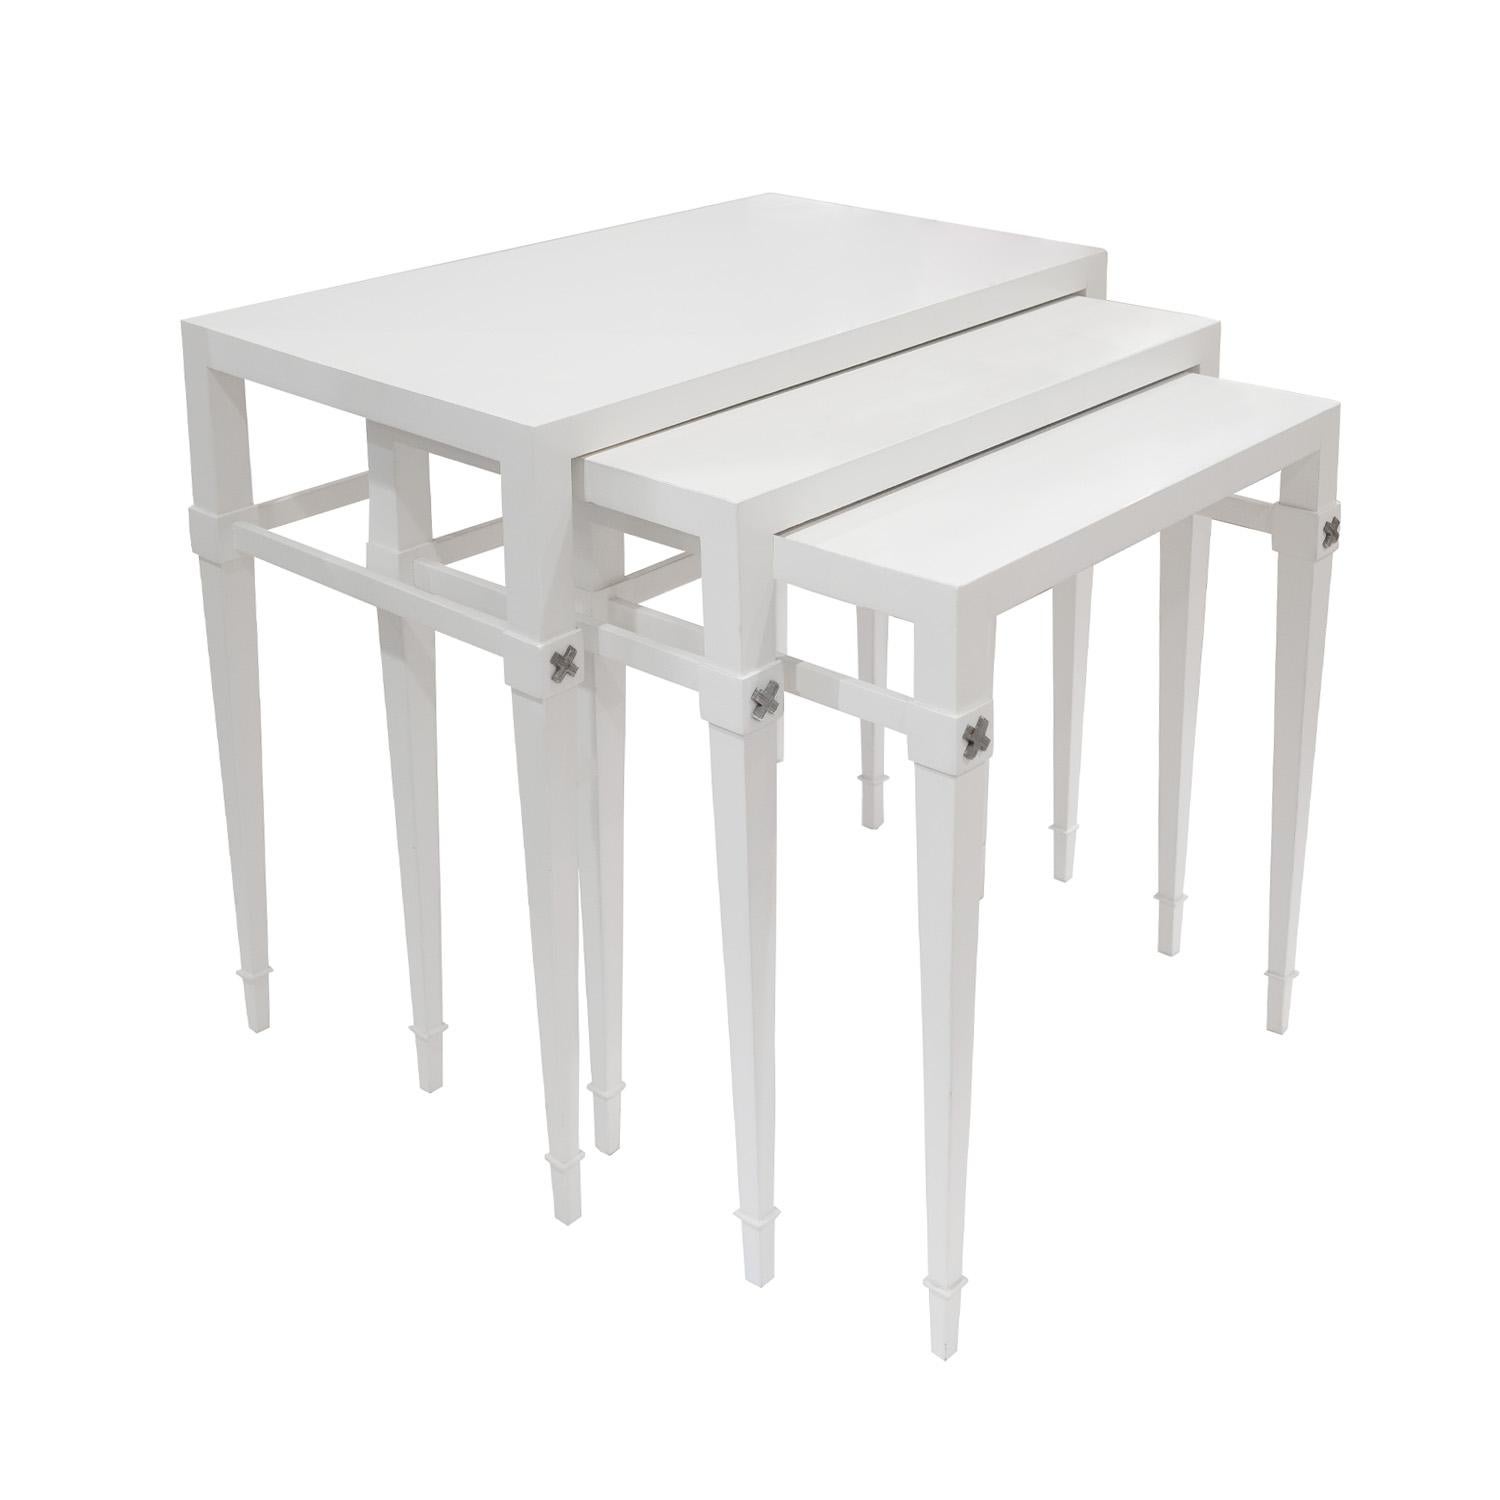 Rare set of 3 nesting tables model M111, beautifully made in white lacquer with etched nickel X accents on the tapering legs by Tommi Parzinger for Charak Modern, American 1940's (signed “Charak Modern” on label on bottom). These tables are